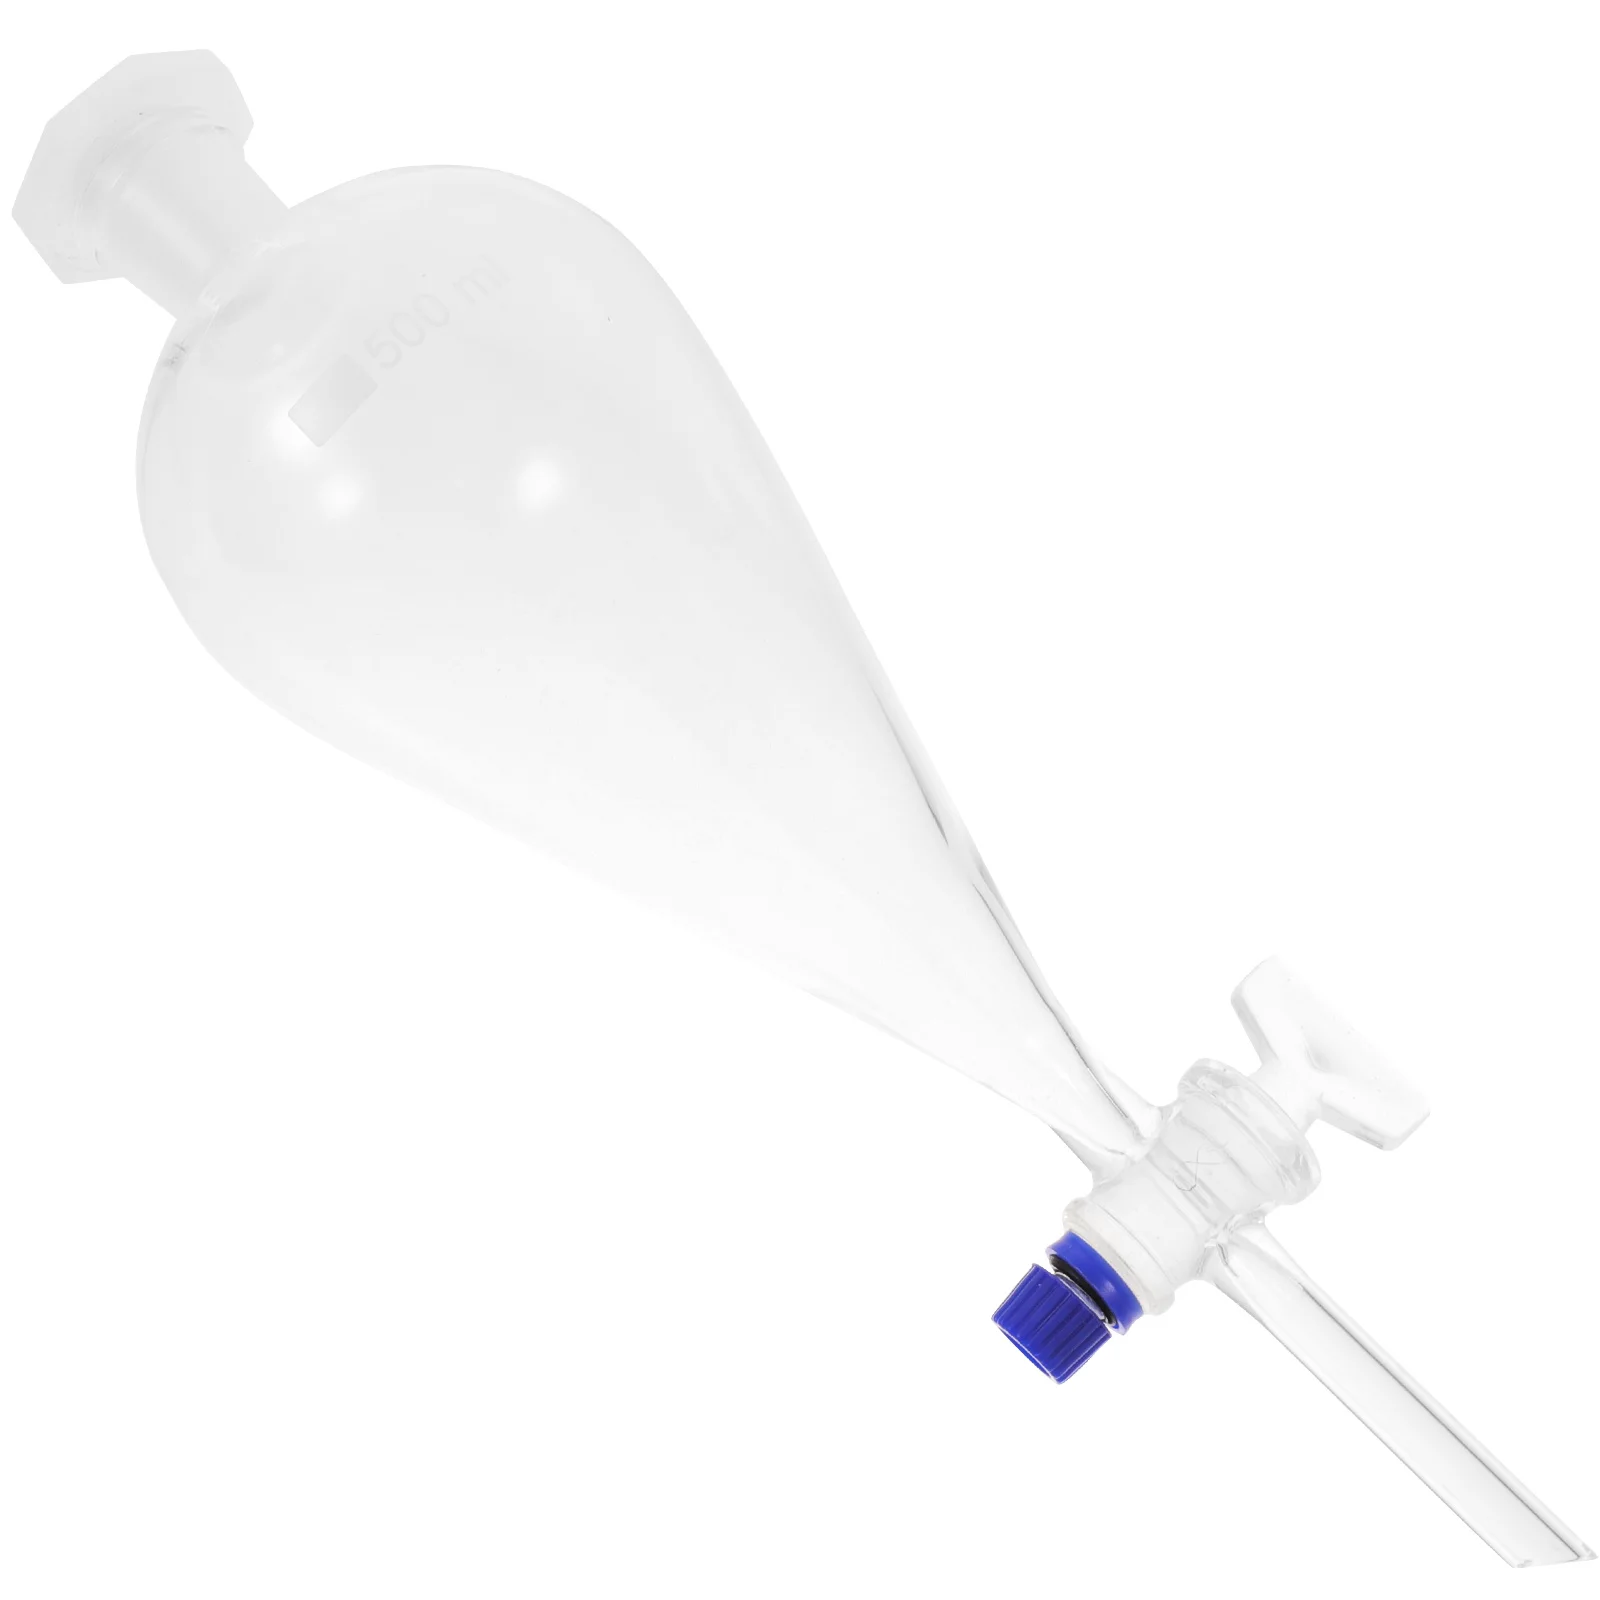 Pear Shaped Separatory Funnel Separating Labs Laboratory Essential Oil Distiller Leakproof